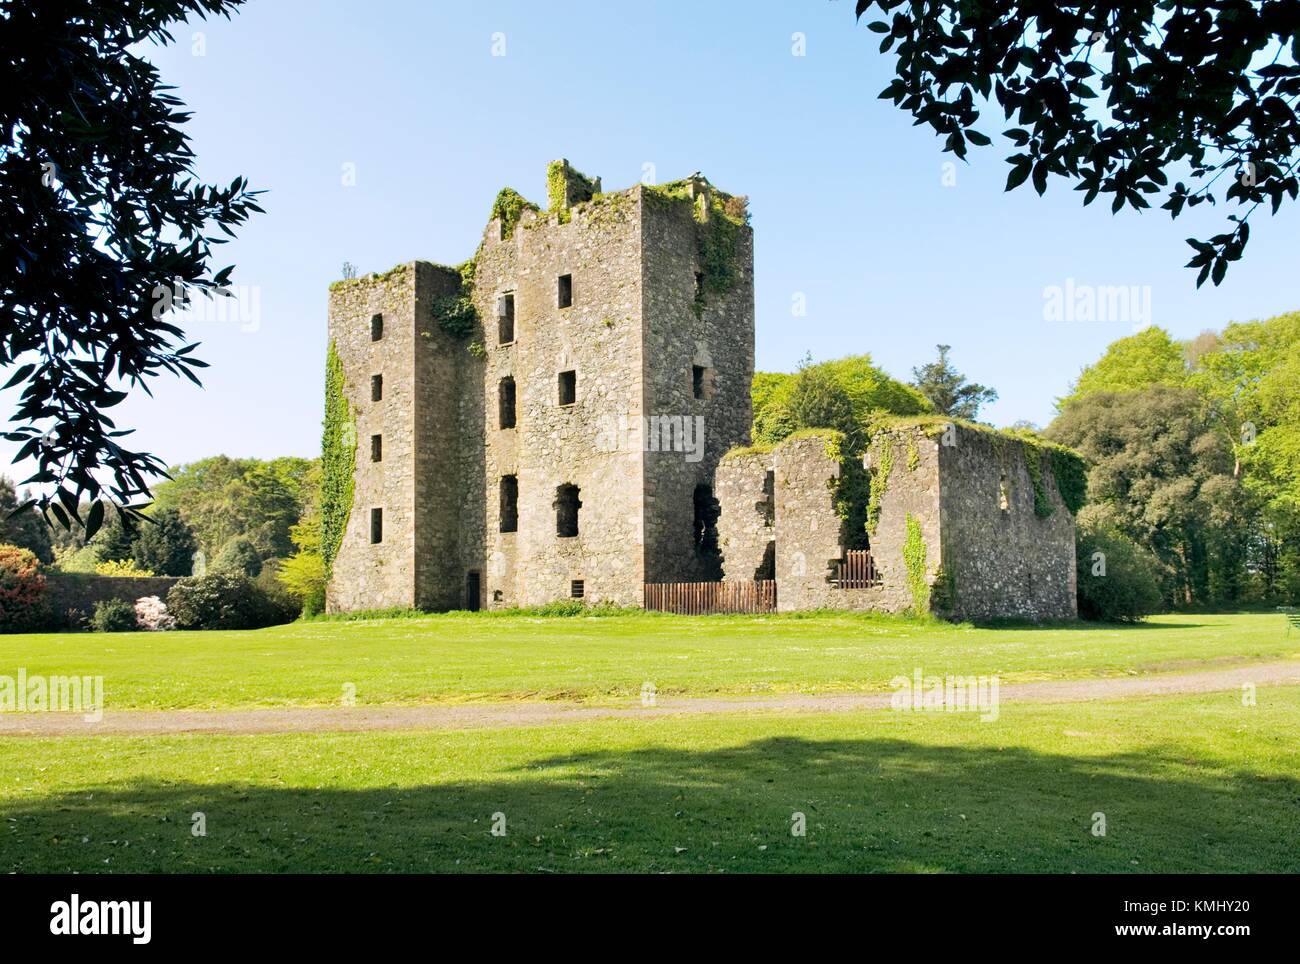 The ruins of the 14th C. Castle Kennedy near Stranraer in the Dumfries and Galloway region of Scotland, UK Stock Photo